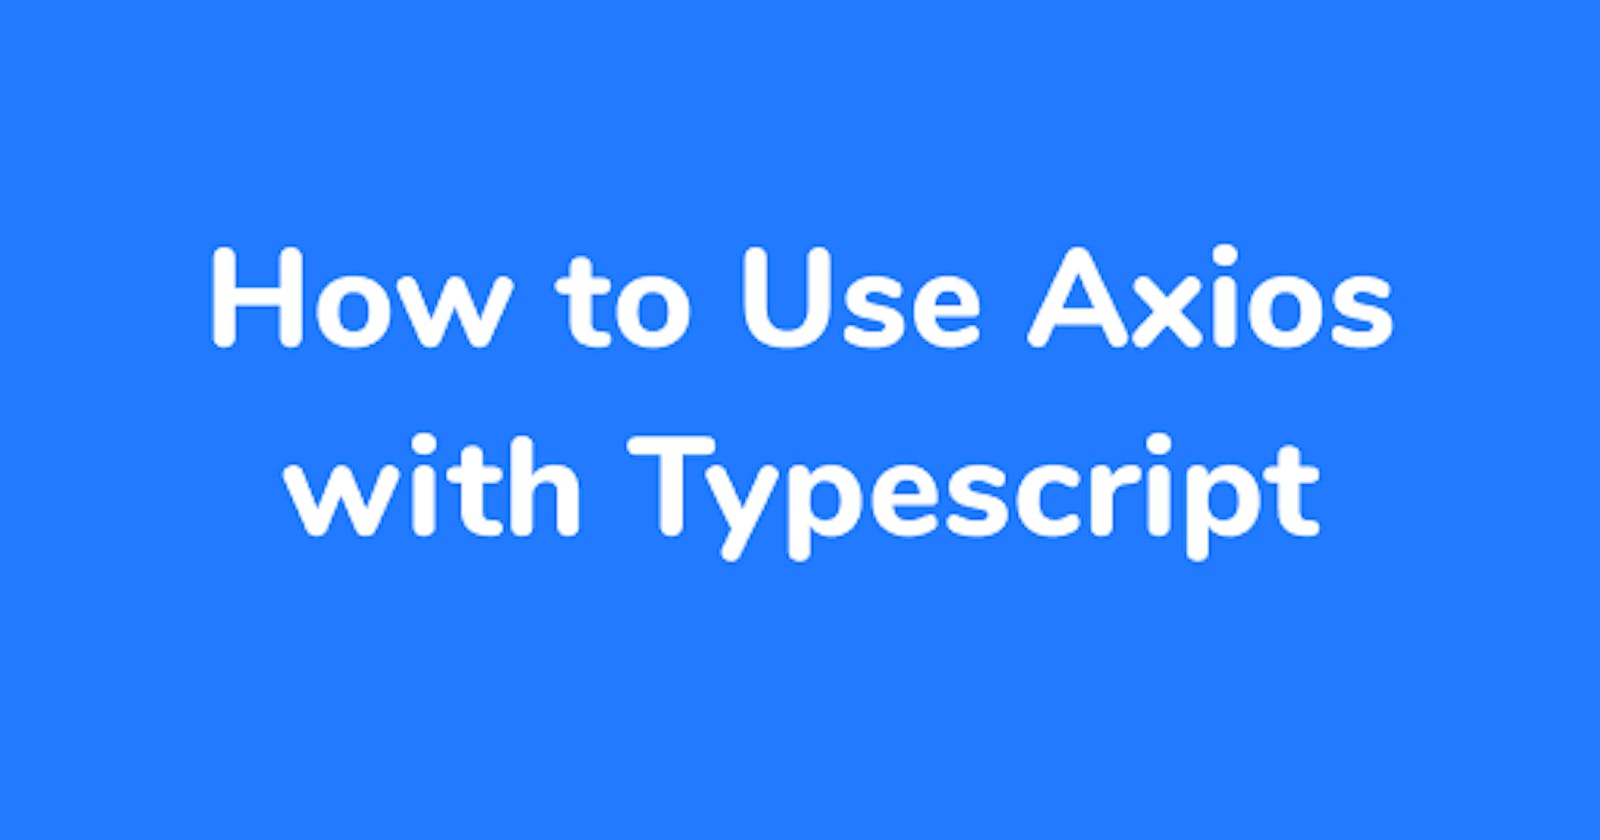 How to Use Axios with Typescript